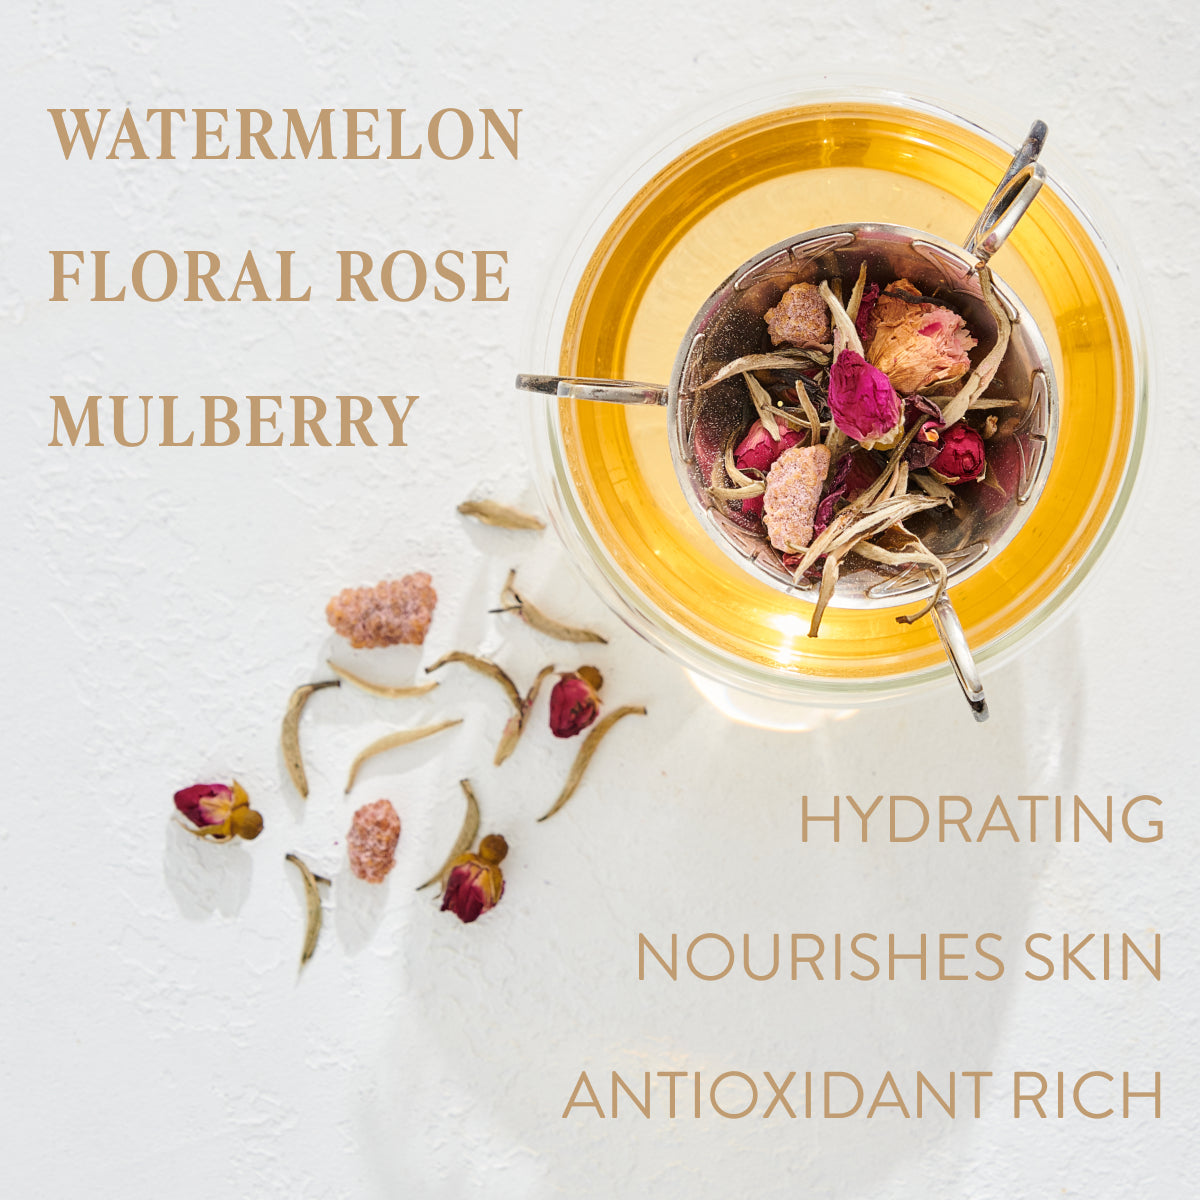 A cup of tea infused with various floral ingredients, including rose petals and dried mulberries, sits next to some scattered tea leaves and flowers. The words "WATERMELON, FLORAL ROSE, MULBERRY" and "HYDRATING, NOURISHES SKIN, ANTIOXIDANT RICH" are displayed around this organic loose leaf tea from Magic Hour called Gemini: Watermelon-Rose-Mulberry Pomegranate Tea for Beauty, Balance & Quenching Curiositeas.